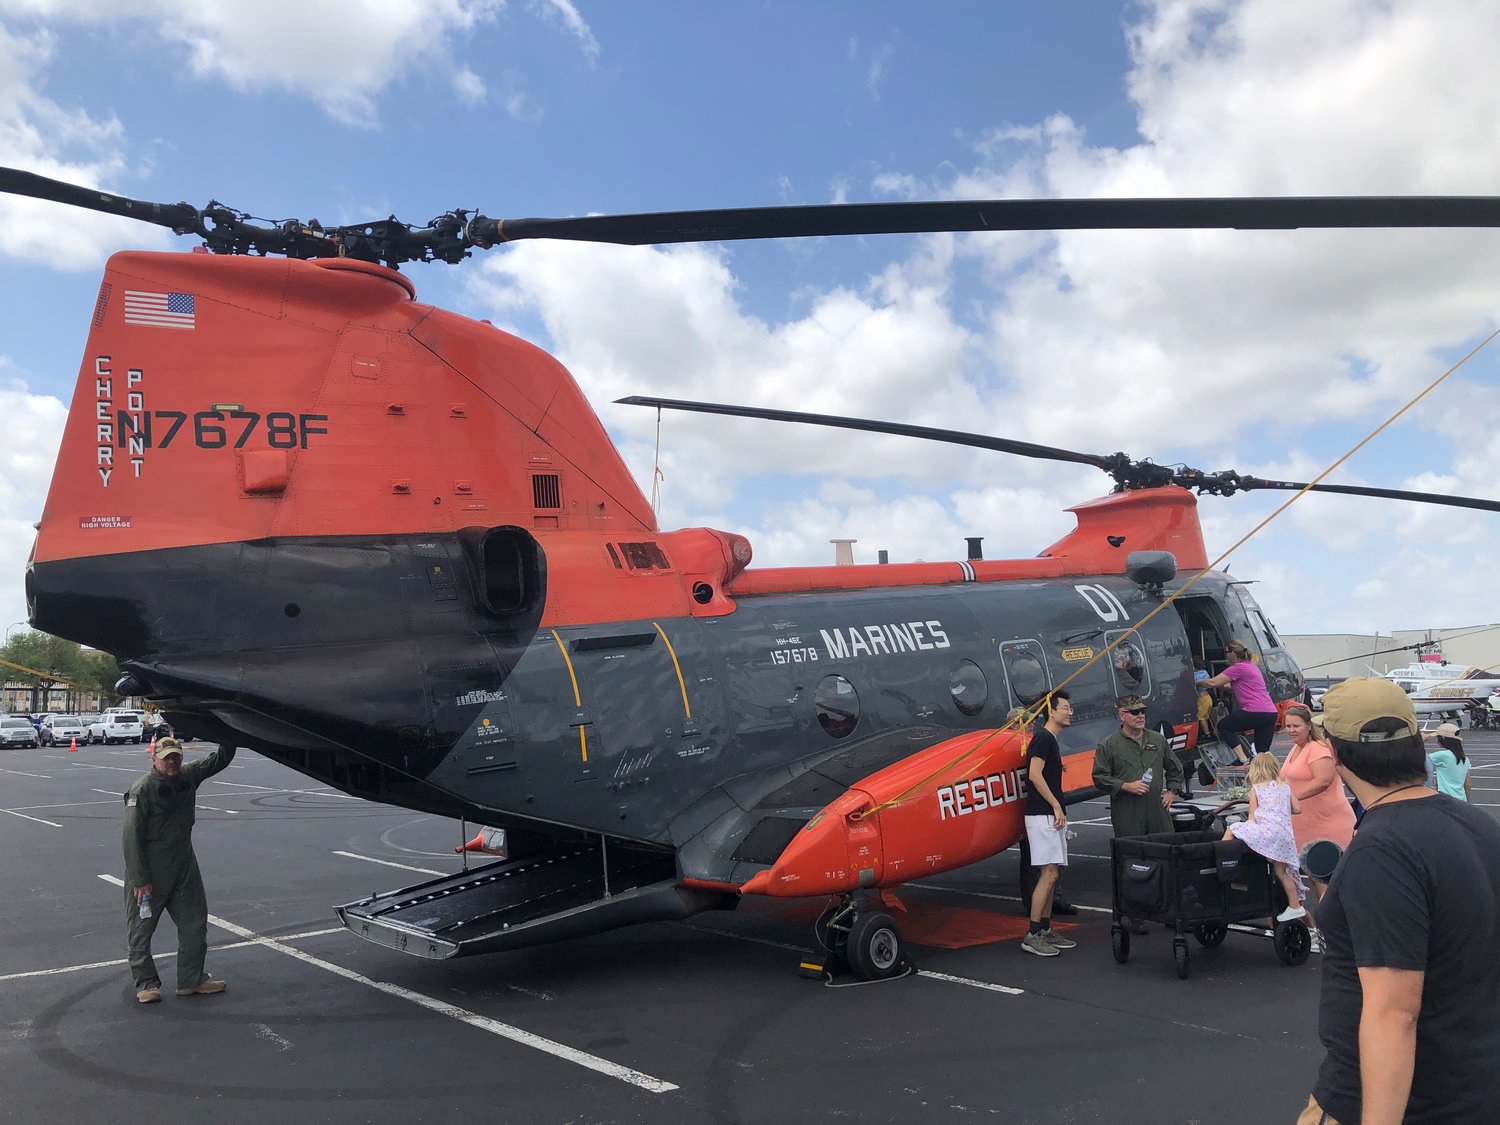 A U.S. Marine rescue helicopter at the Safety Fest.